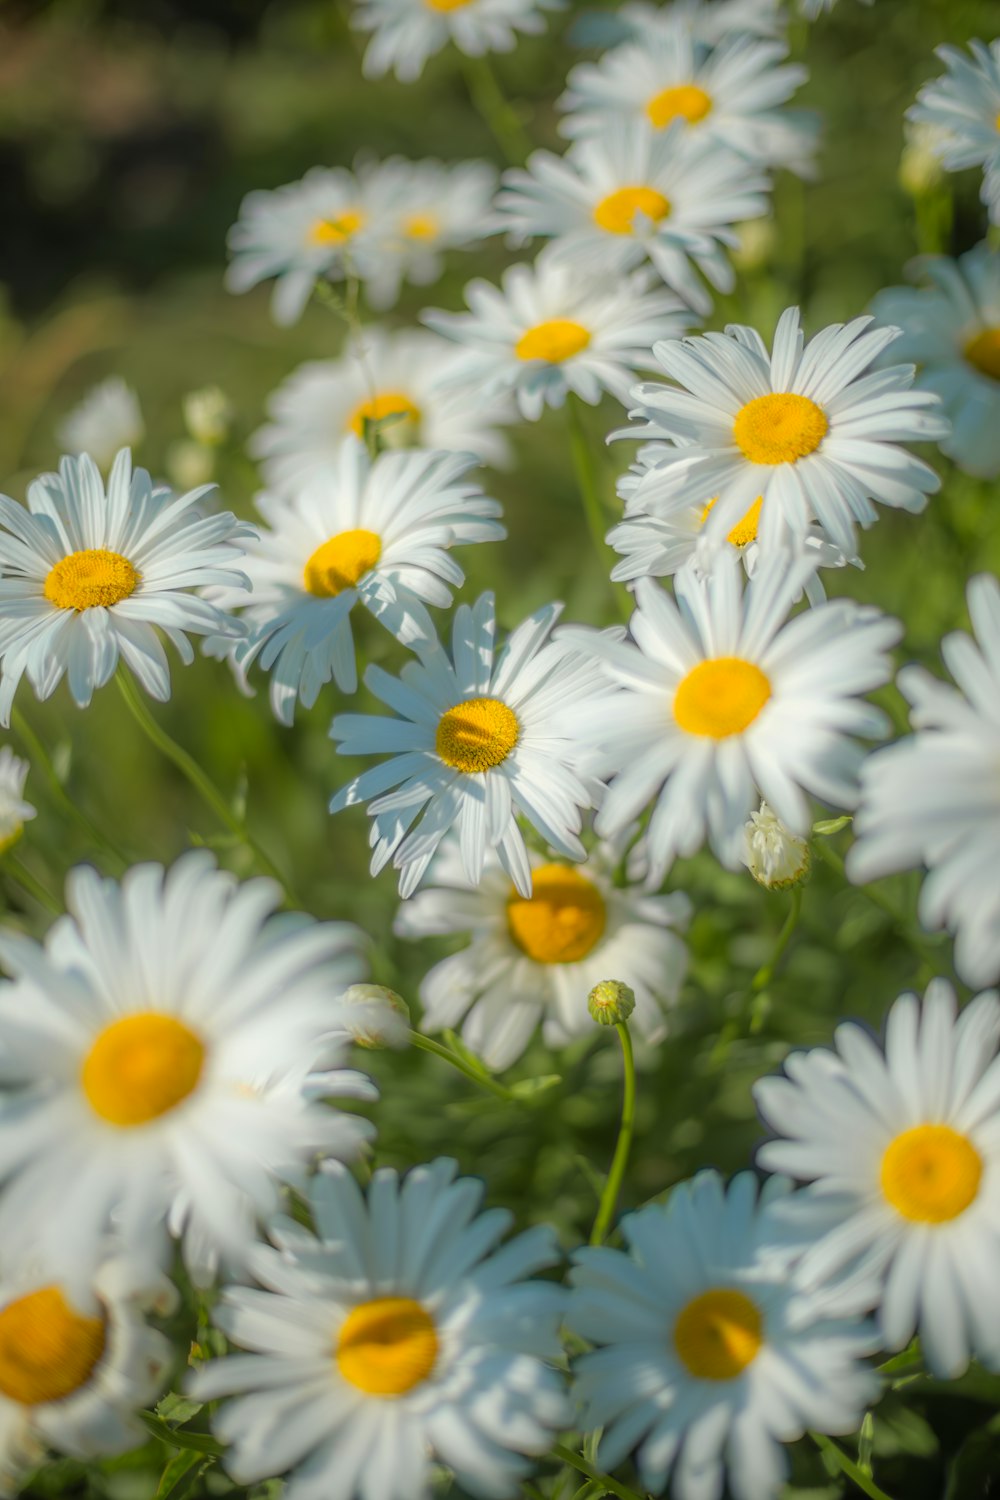 a field full of white and yellow daisies